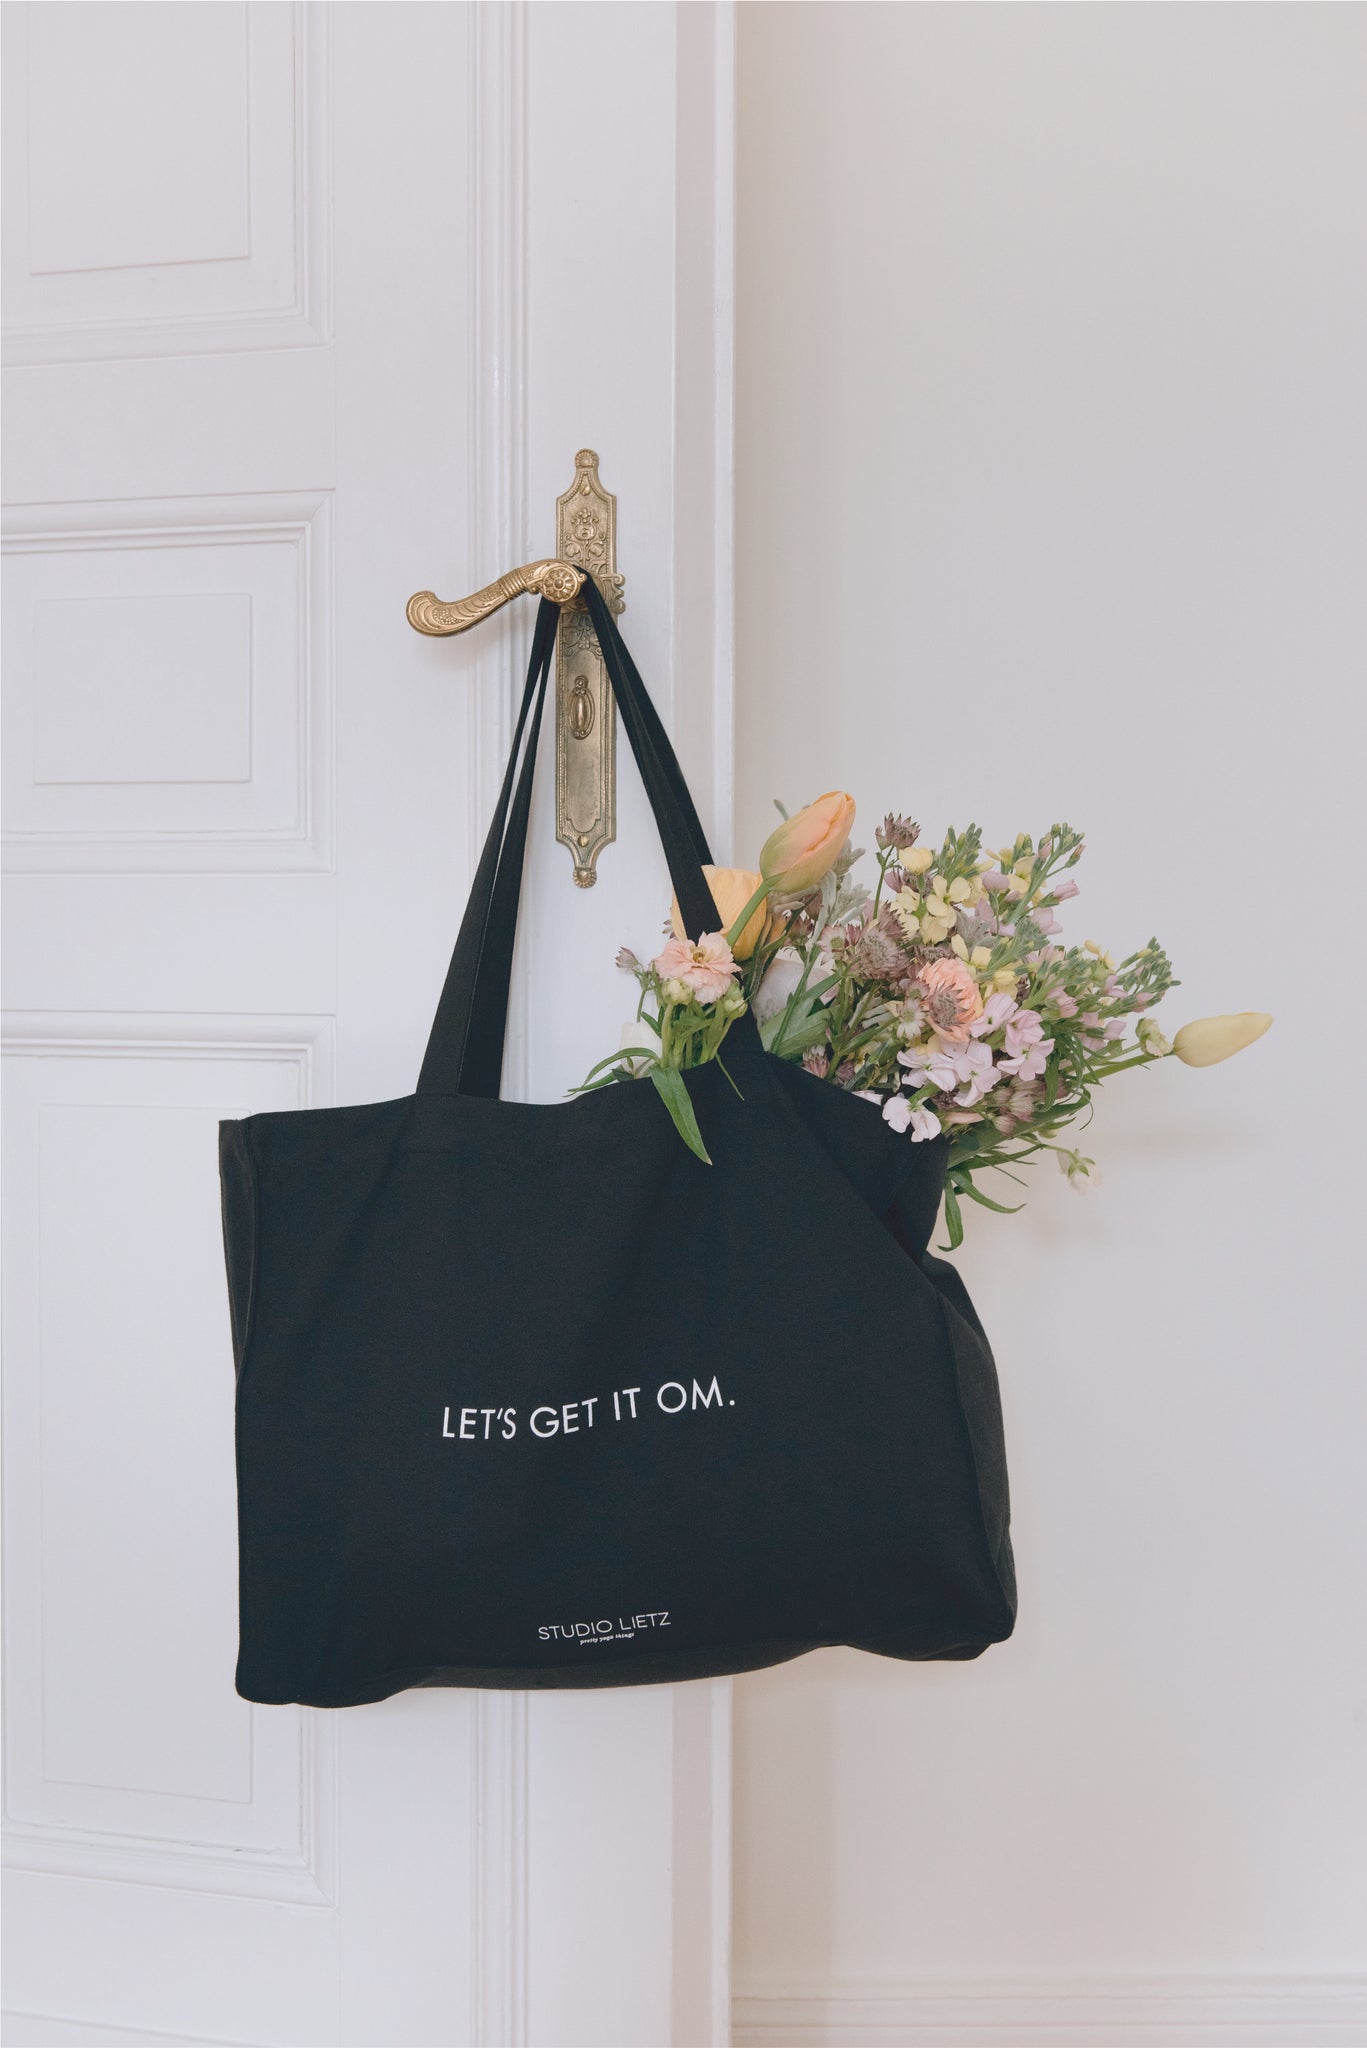 THE MAXI TOTE | LET'S GET IT OM.